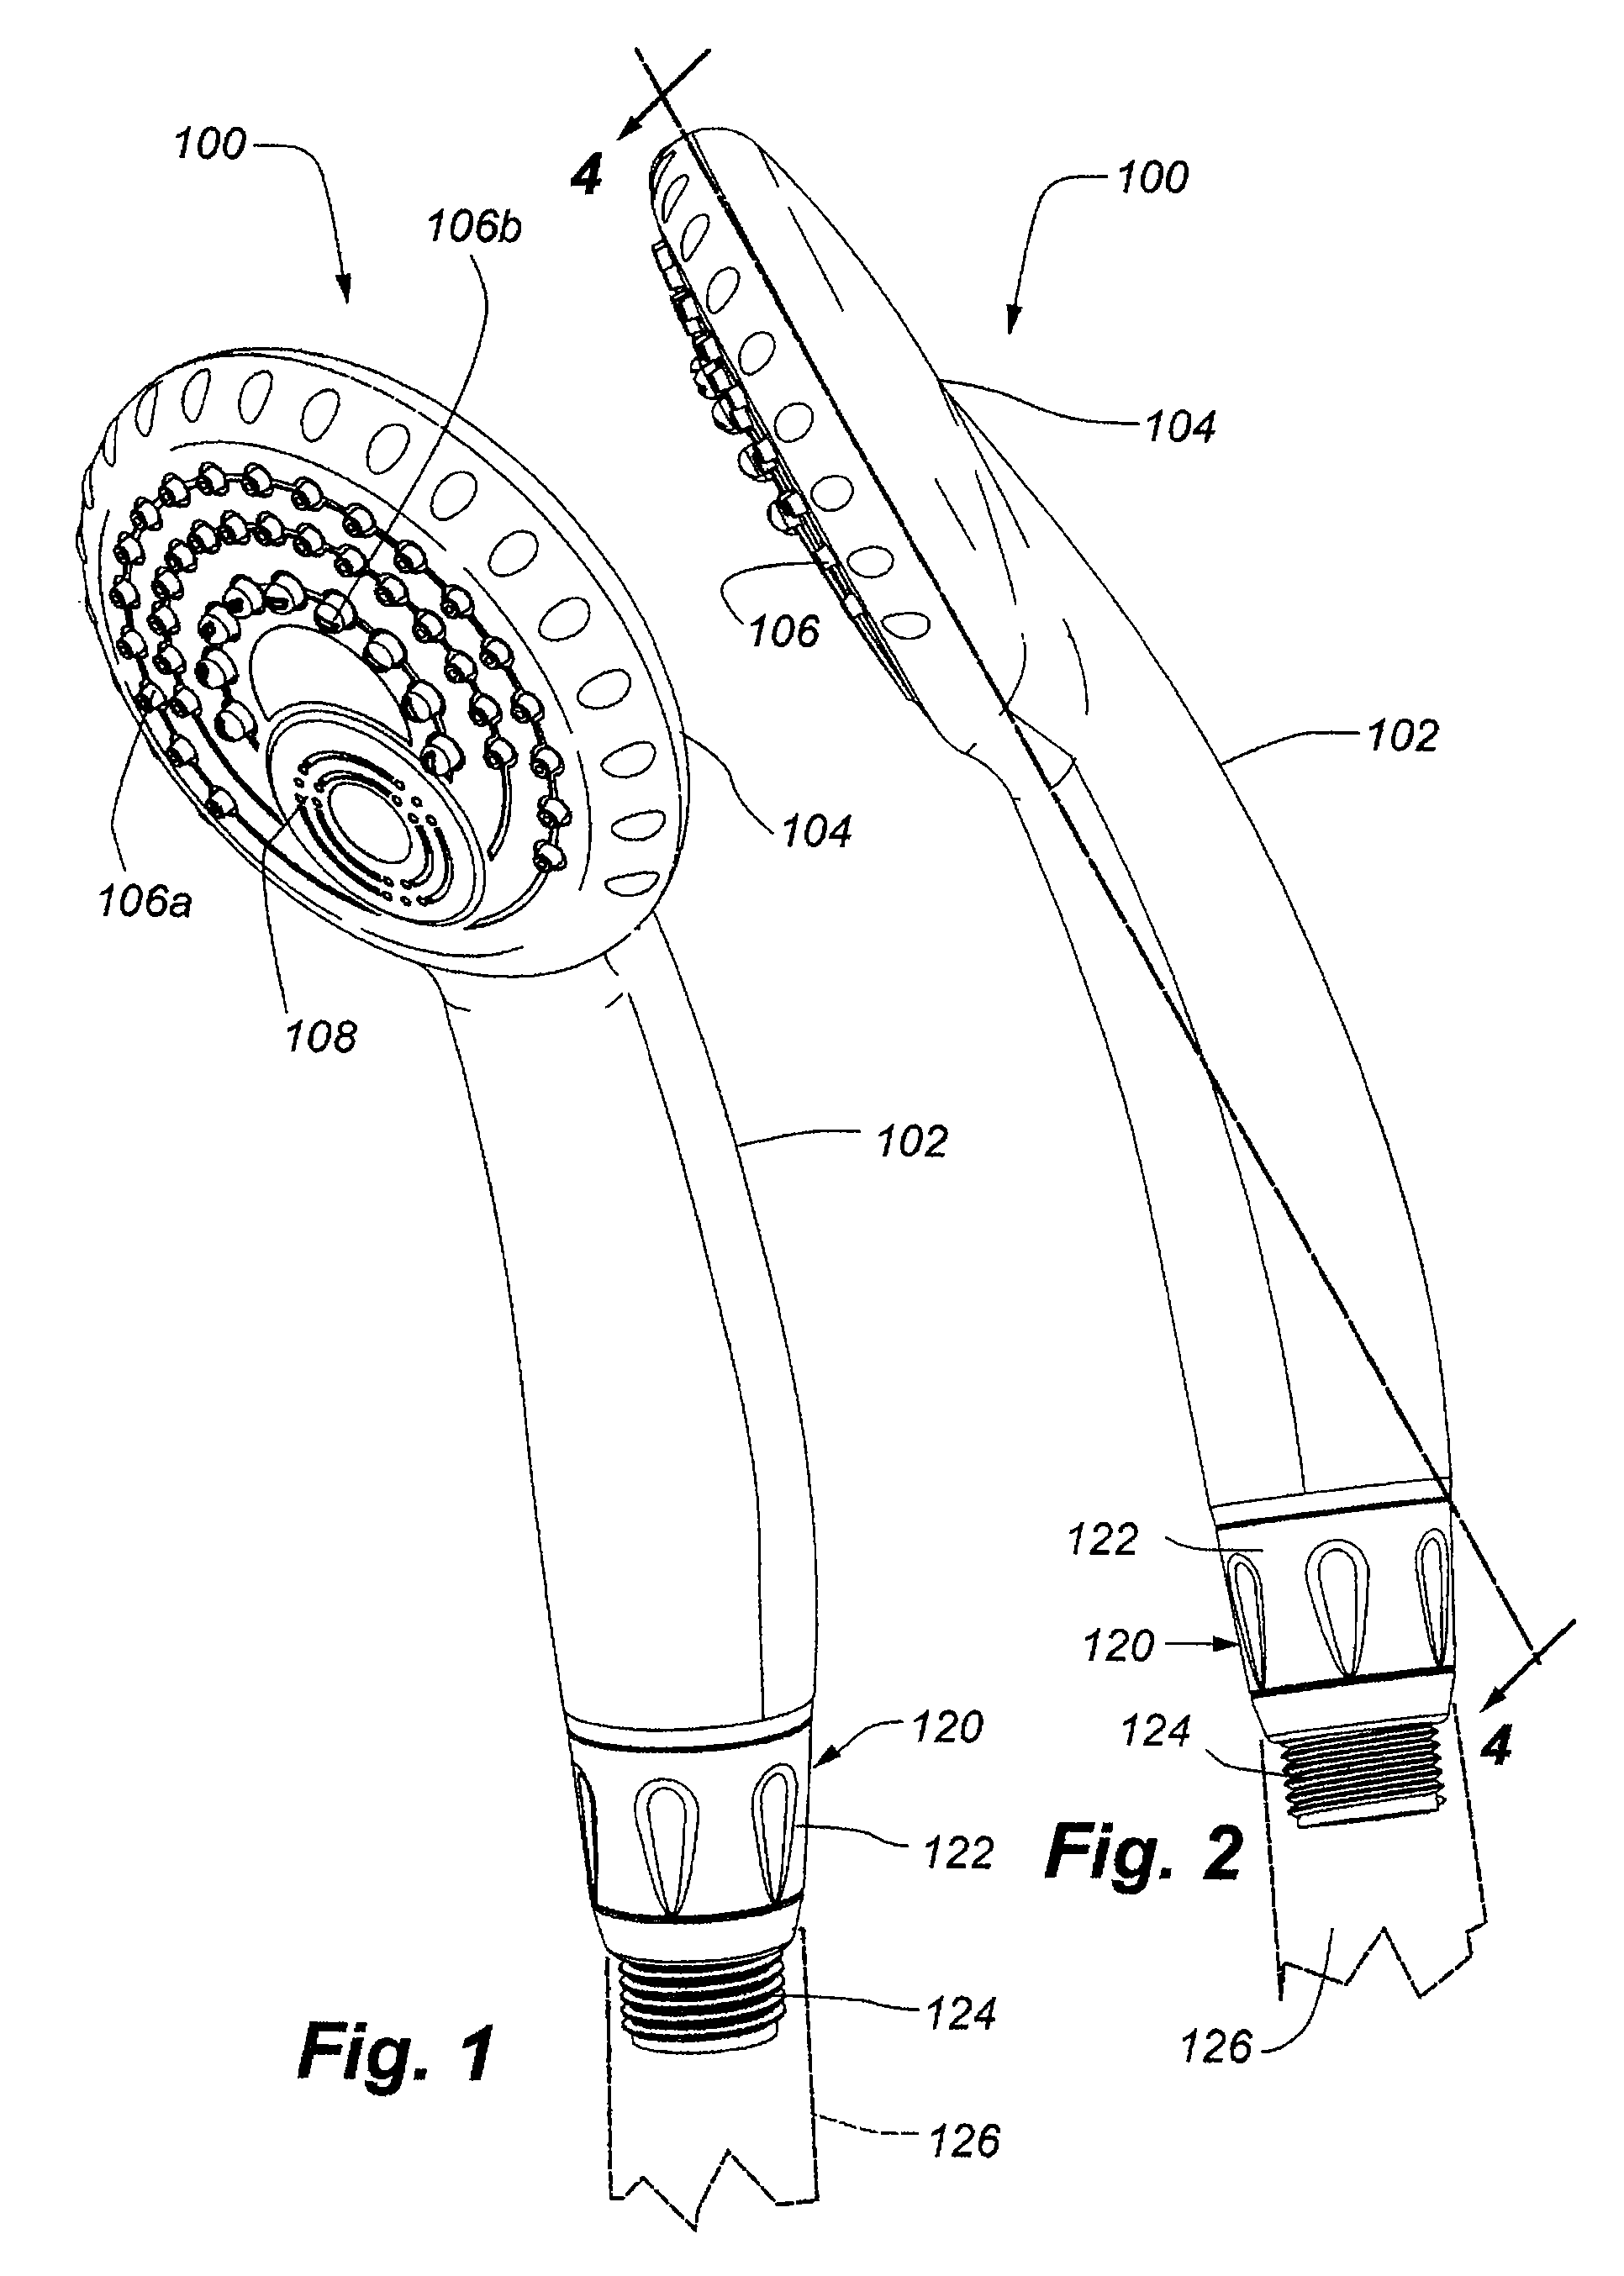 Handheld showerhead with mode control and method of selecting a handheld showerhead mode